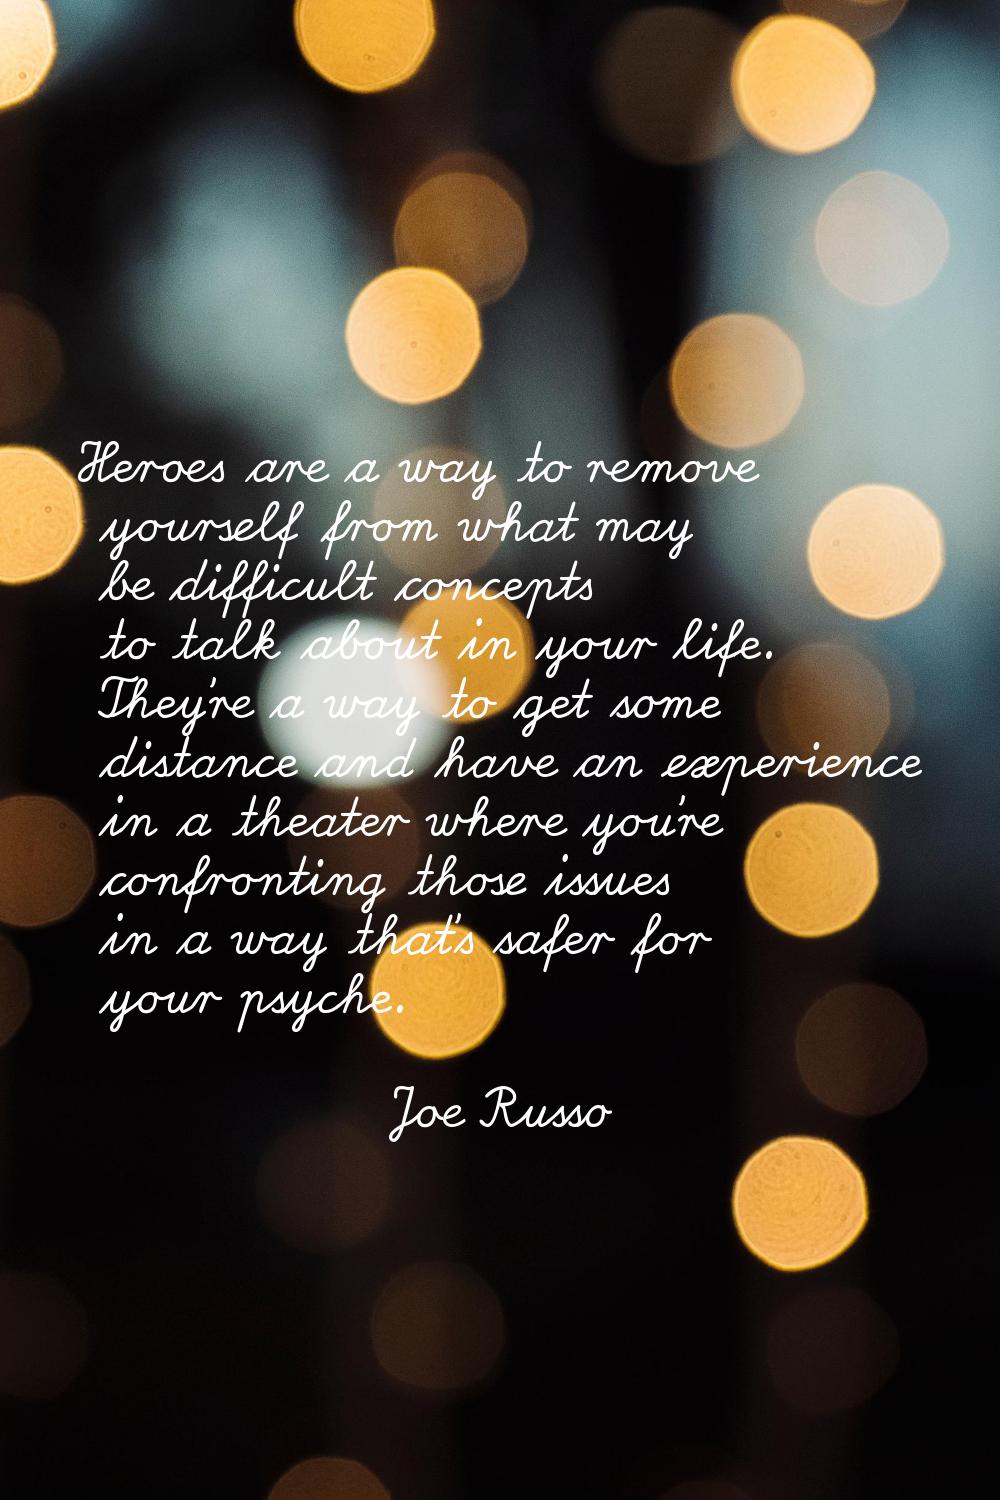 Heroes are a way to remove yourself from what may be difficult concepts to talk about in your life.